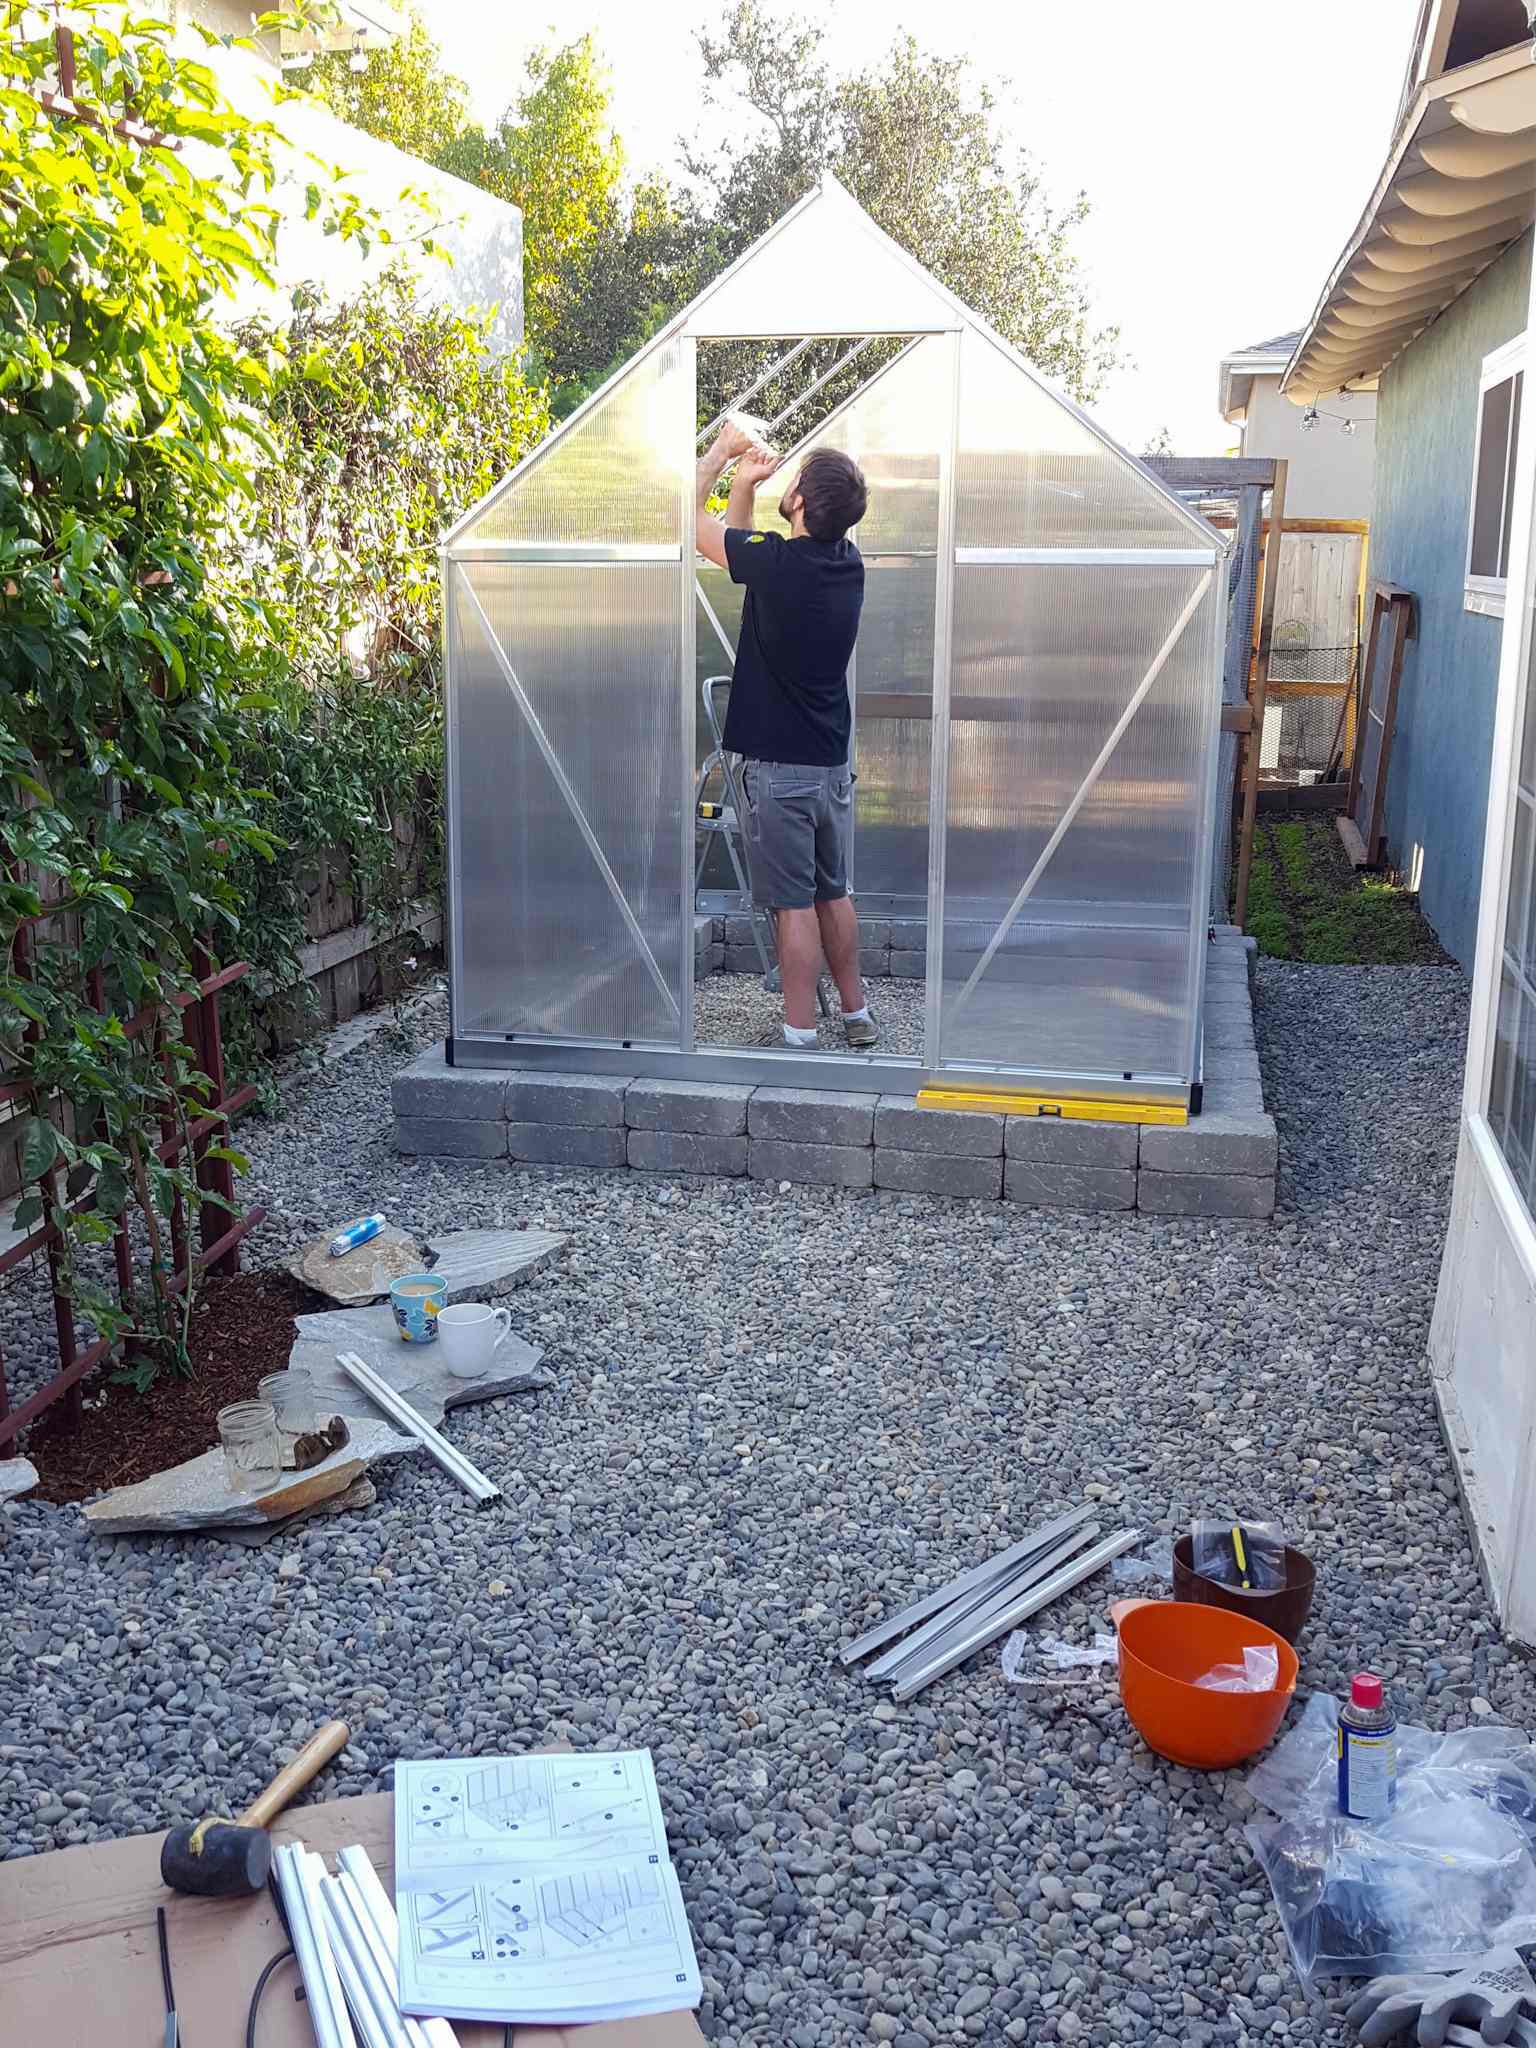 Aaron is inside the greenhouse while it is still under construction. There are tools laid here and there and there are at least two panels of the roof that still need to be installed. A greenhouse is a great use of space to start many plants by seed.